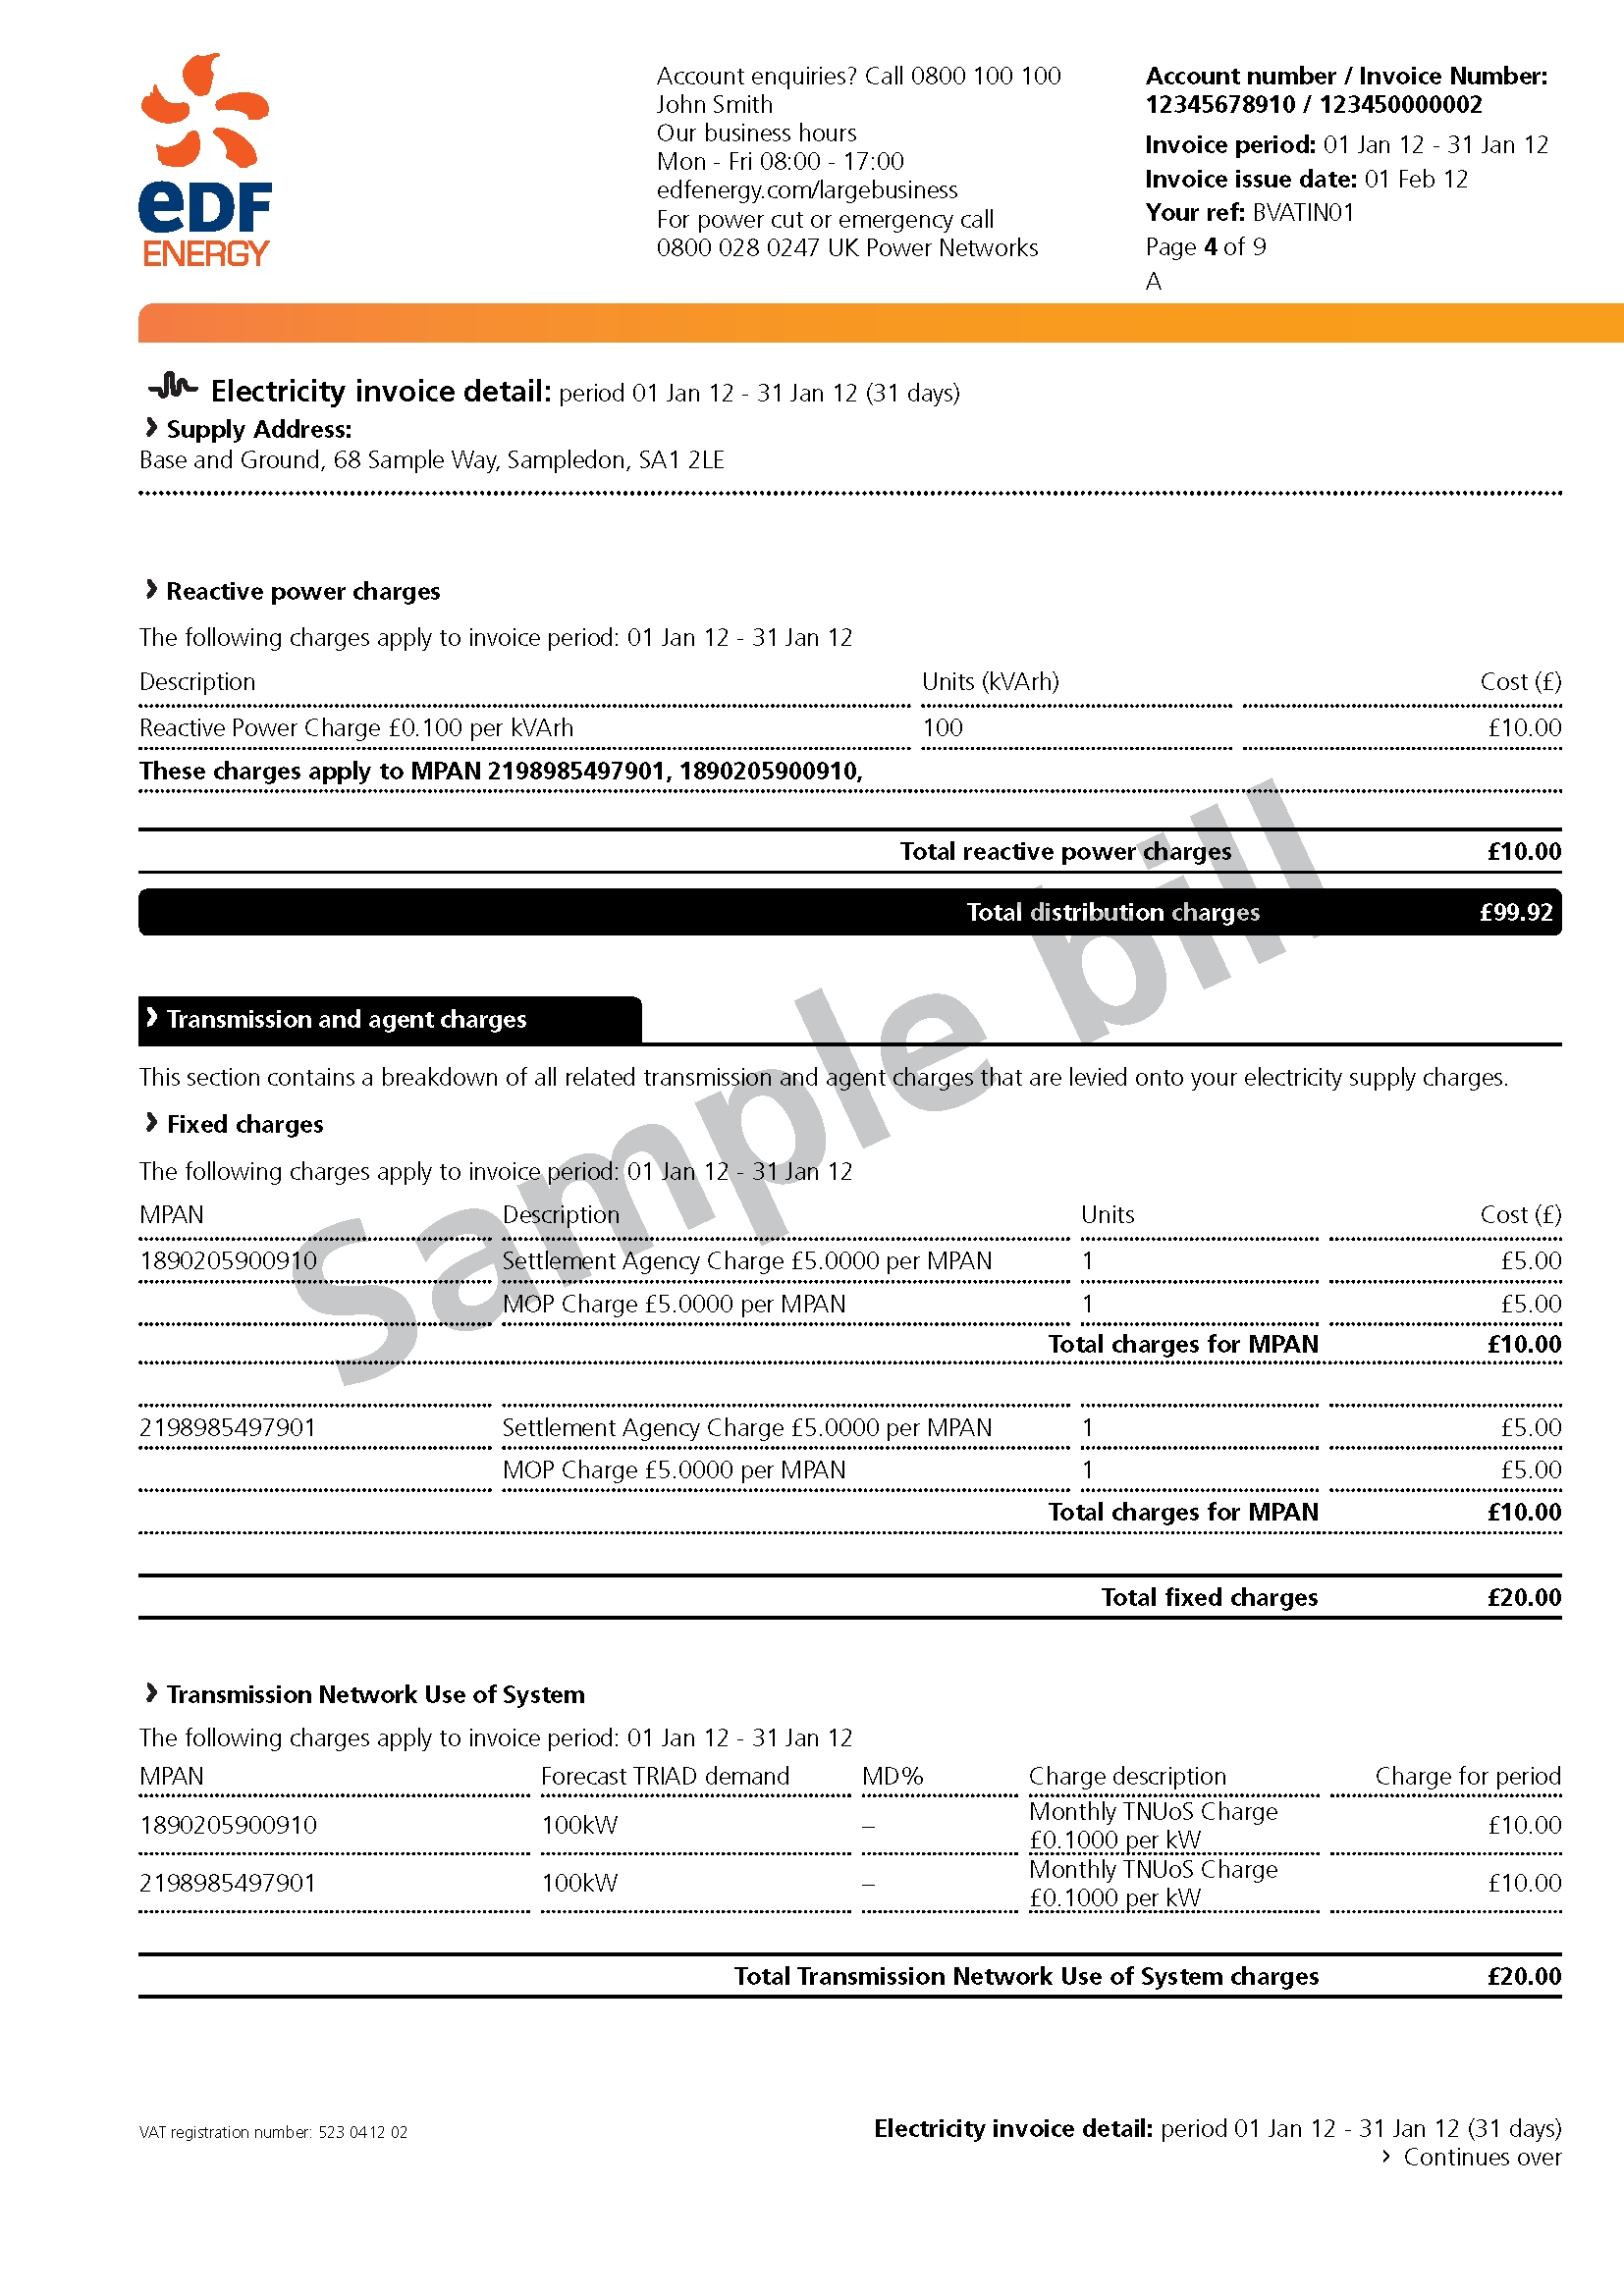 dummy invoice template understanding your bill large business customers edf energy 1654 X 2339